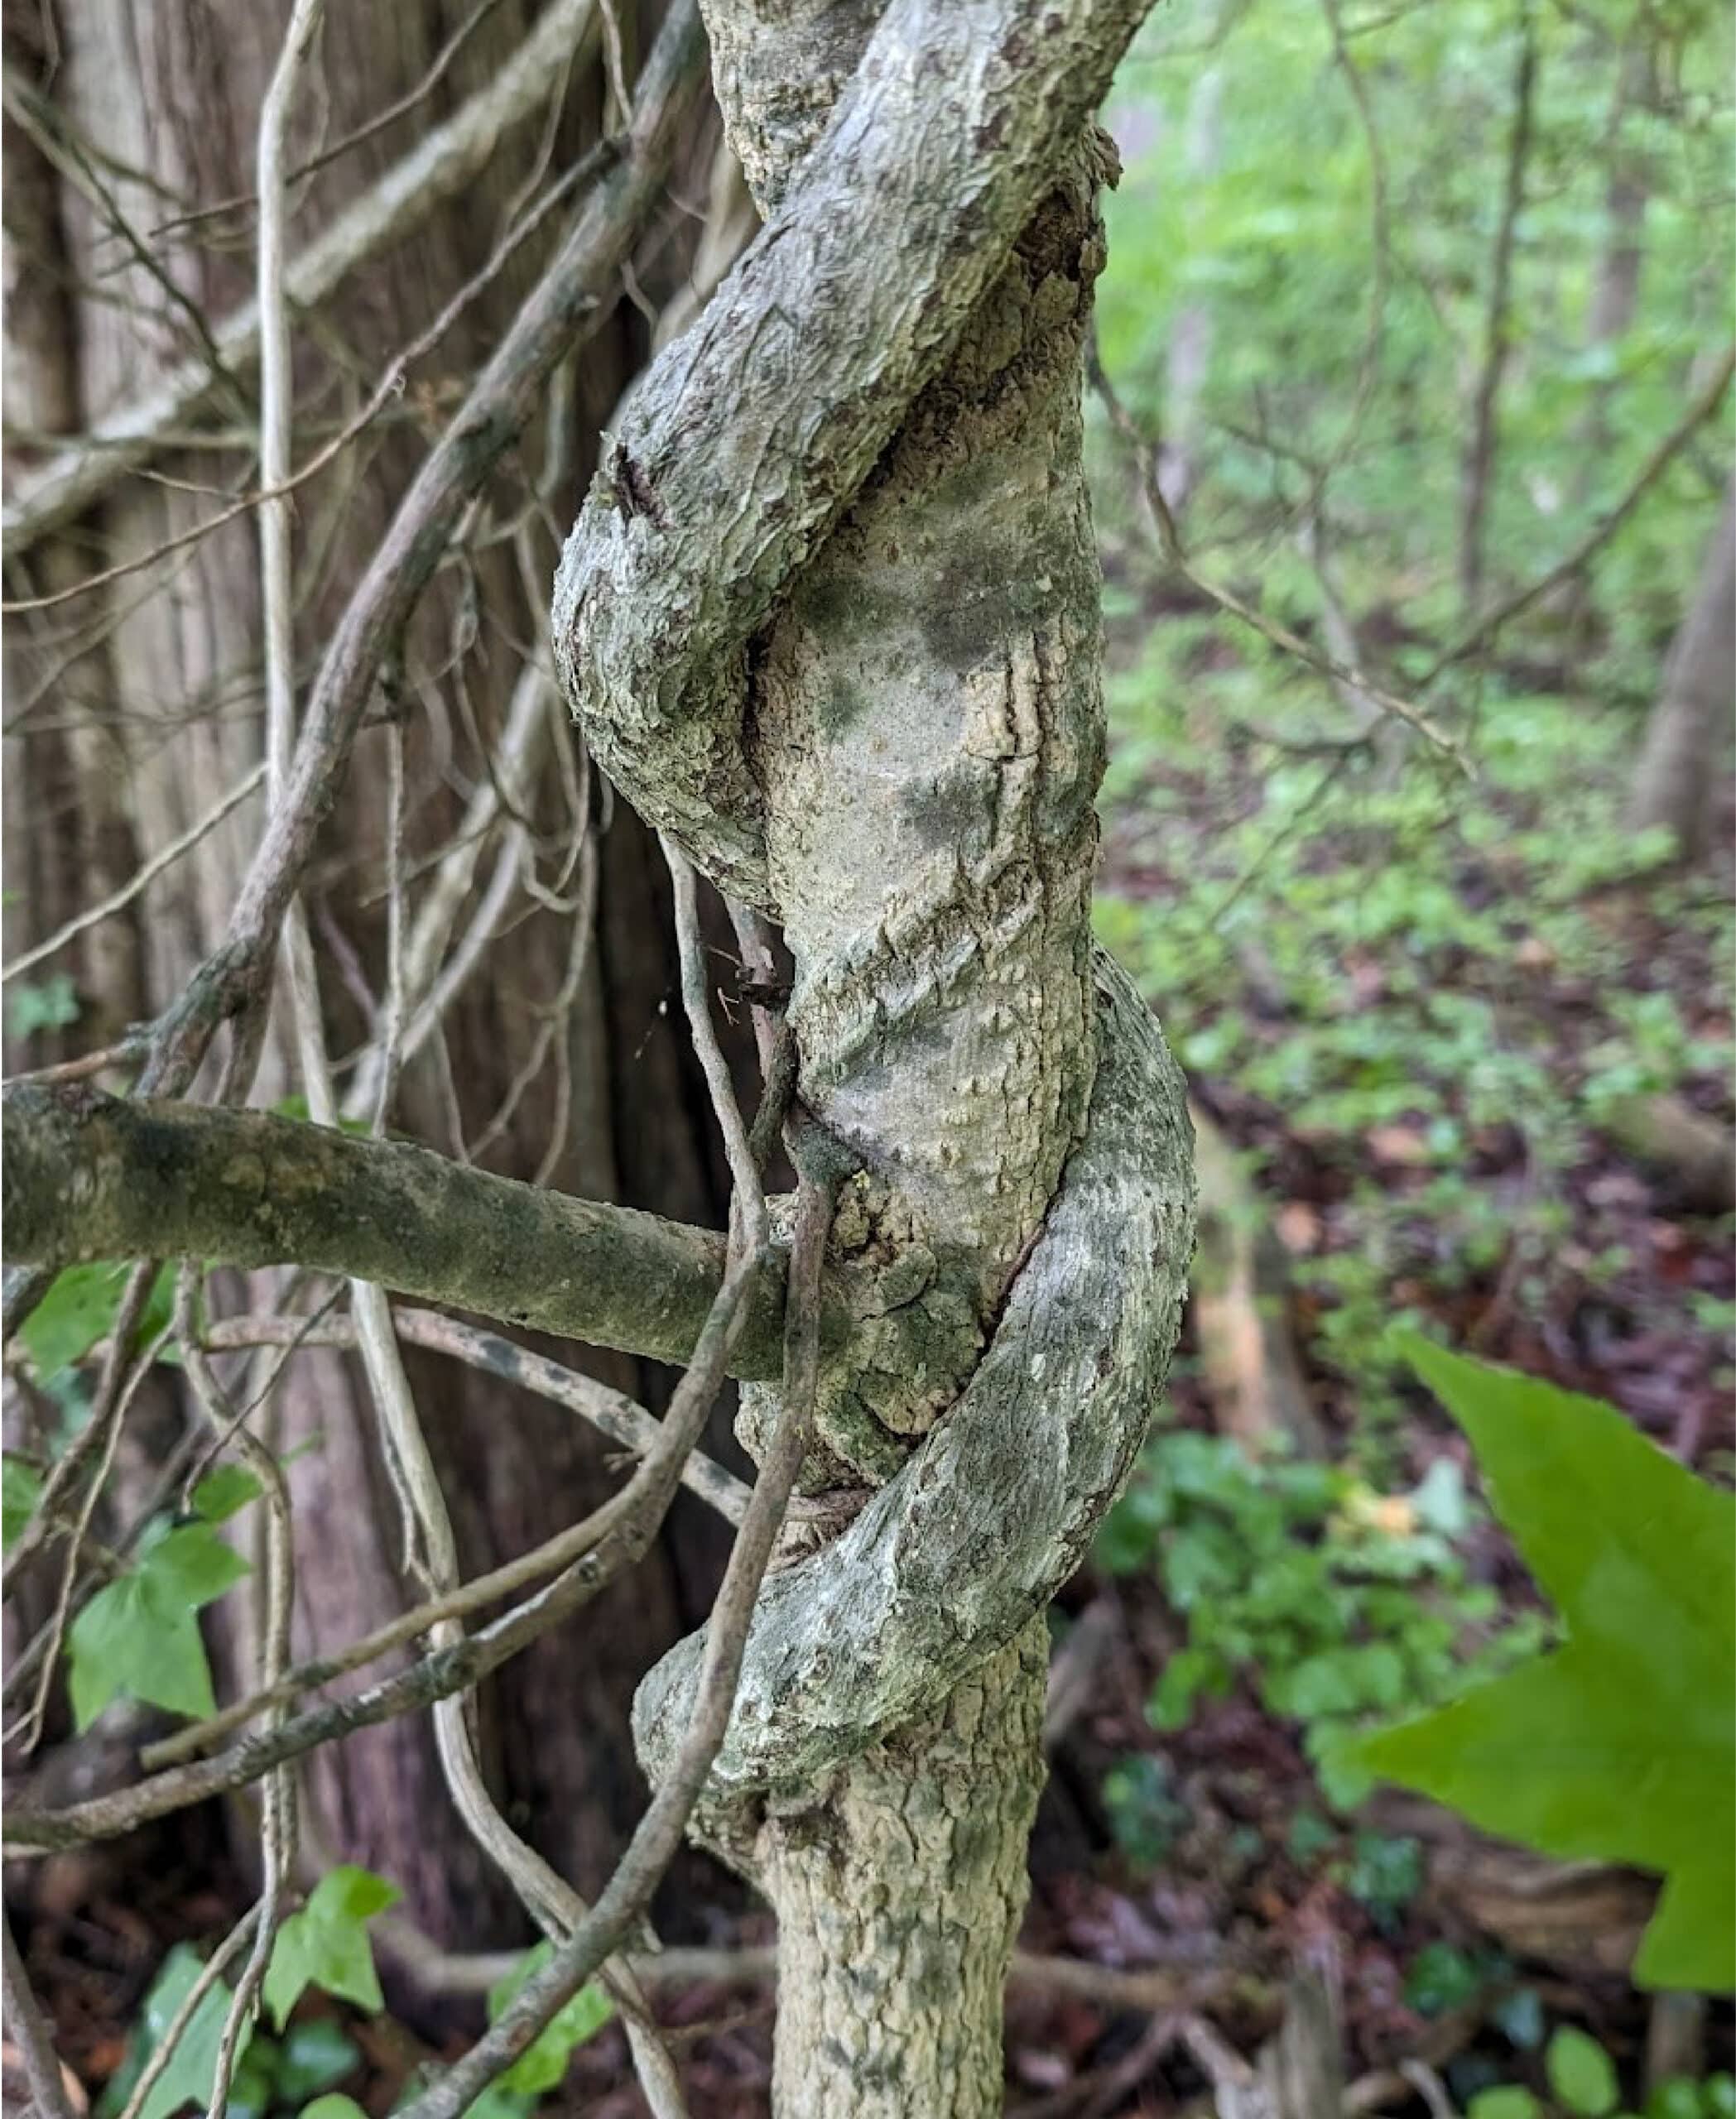 A vine wrapping tightly around a small tree